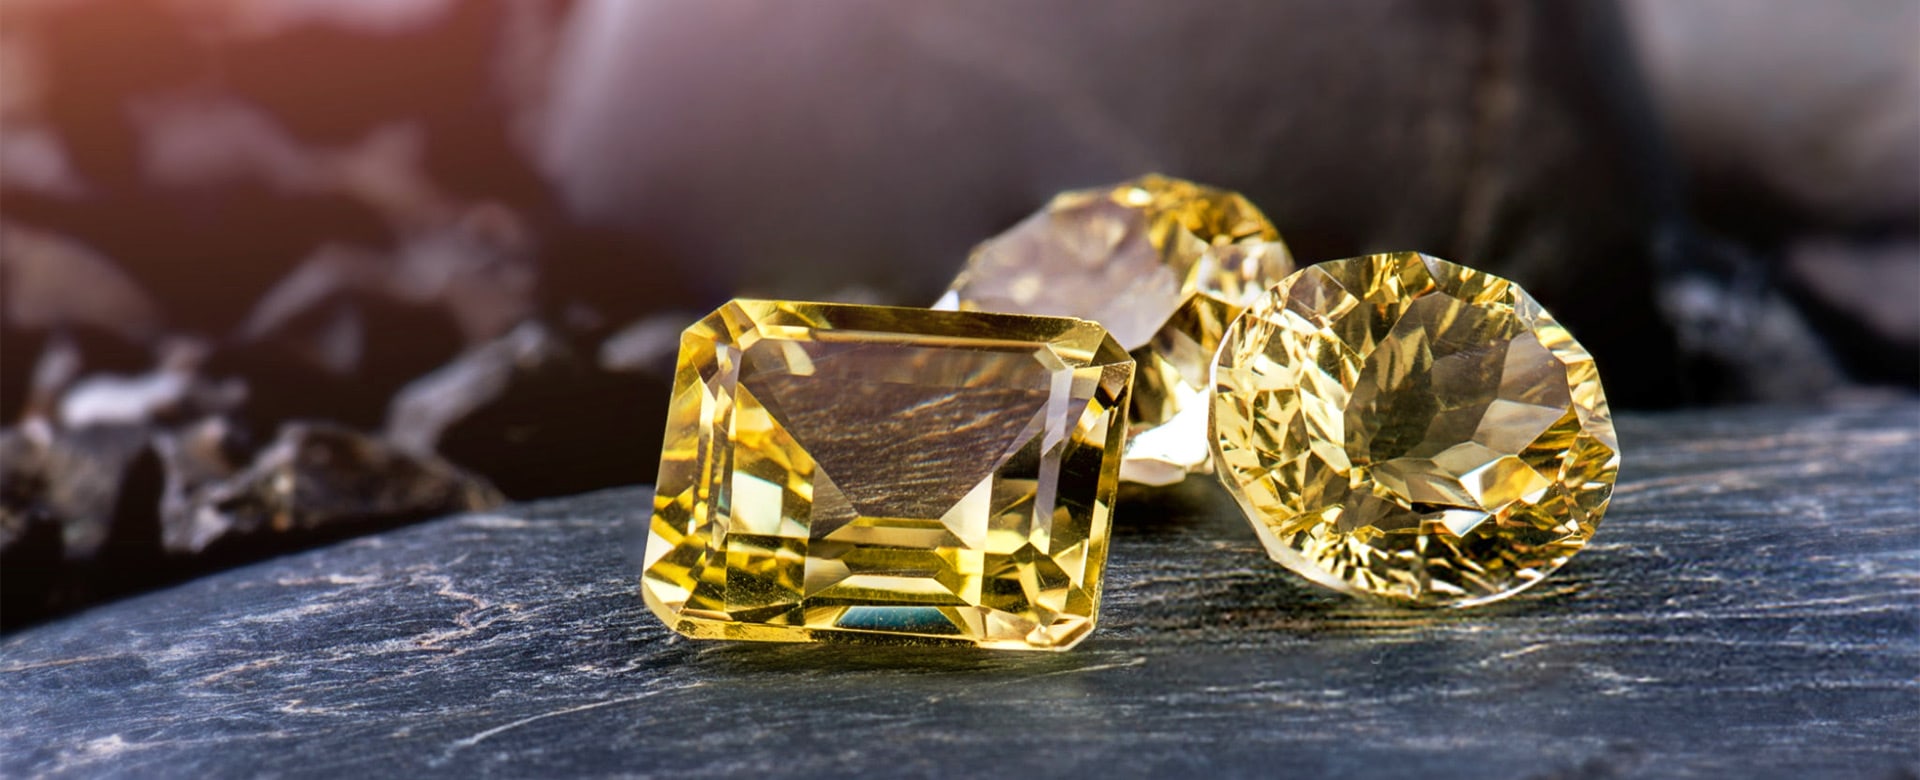 Yellow Topaz: A Gemstone of Brilliance and Beauty 1